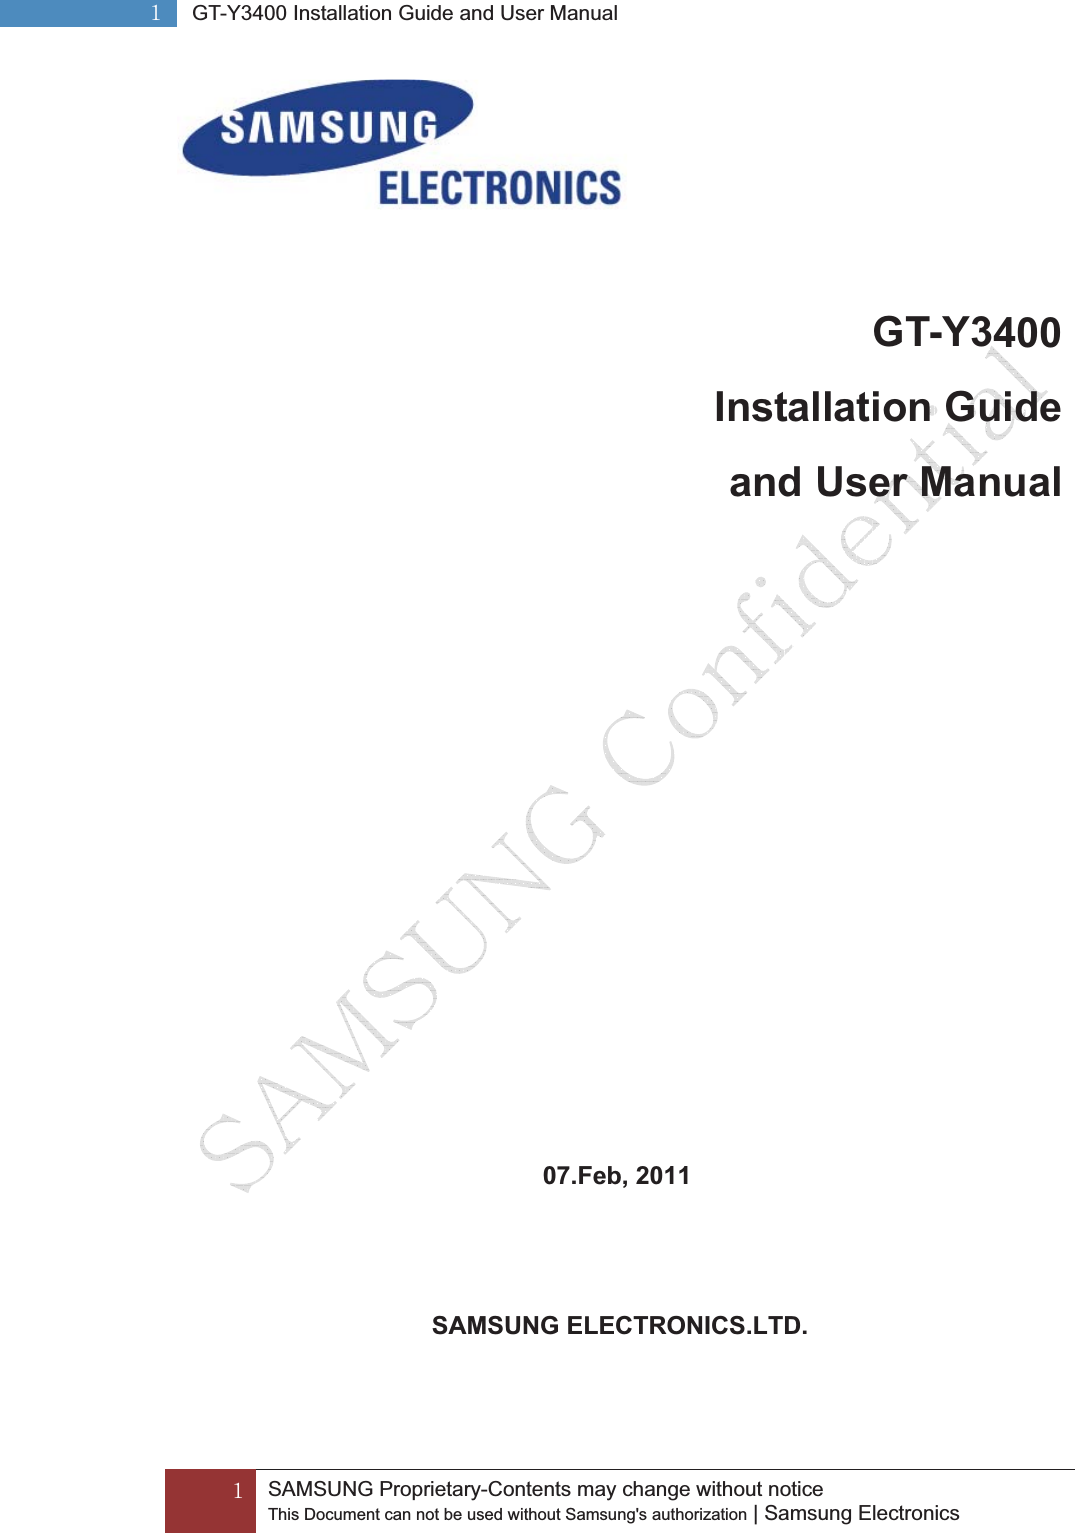 GXGGSAMSUNG Proprietary-Contents may change without notice This Document can not be used without Samsung&apos;s authorization | Samsung Electronics GXG GT-Y3400 Installation Guide and User ManualGGT-Y3400Installation Guide and User Manual 07.Feb, 2011SAMSUNG ELECTRONICS.LTD. 